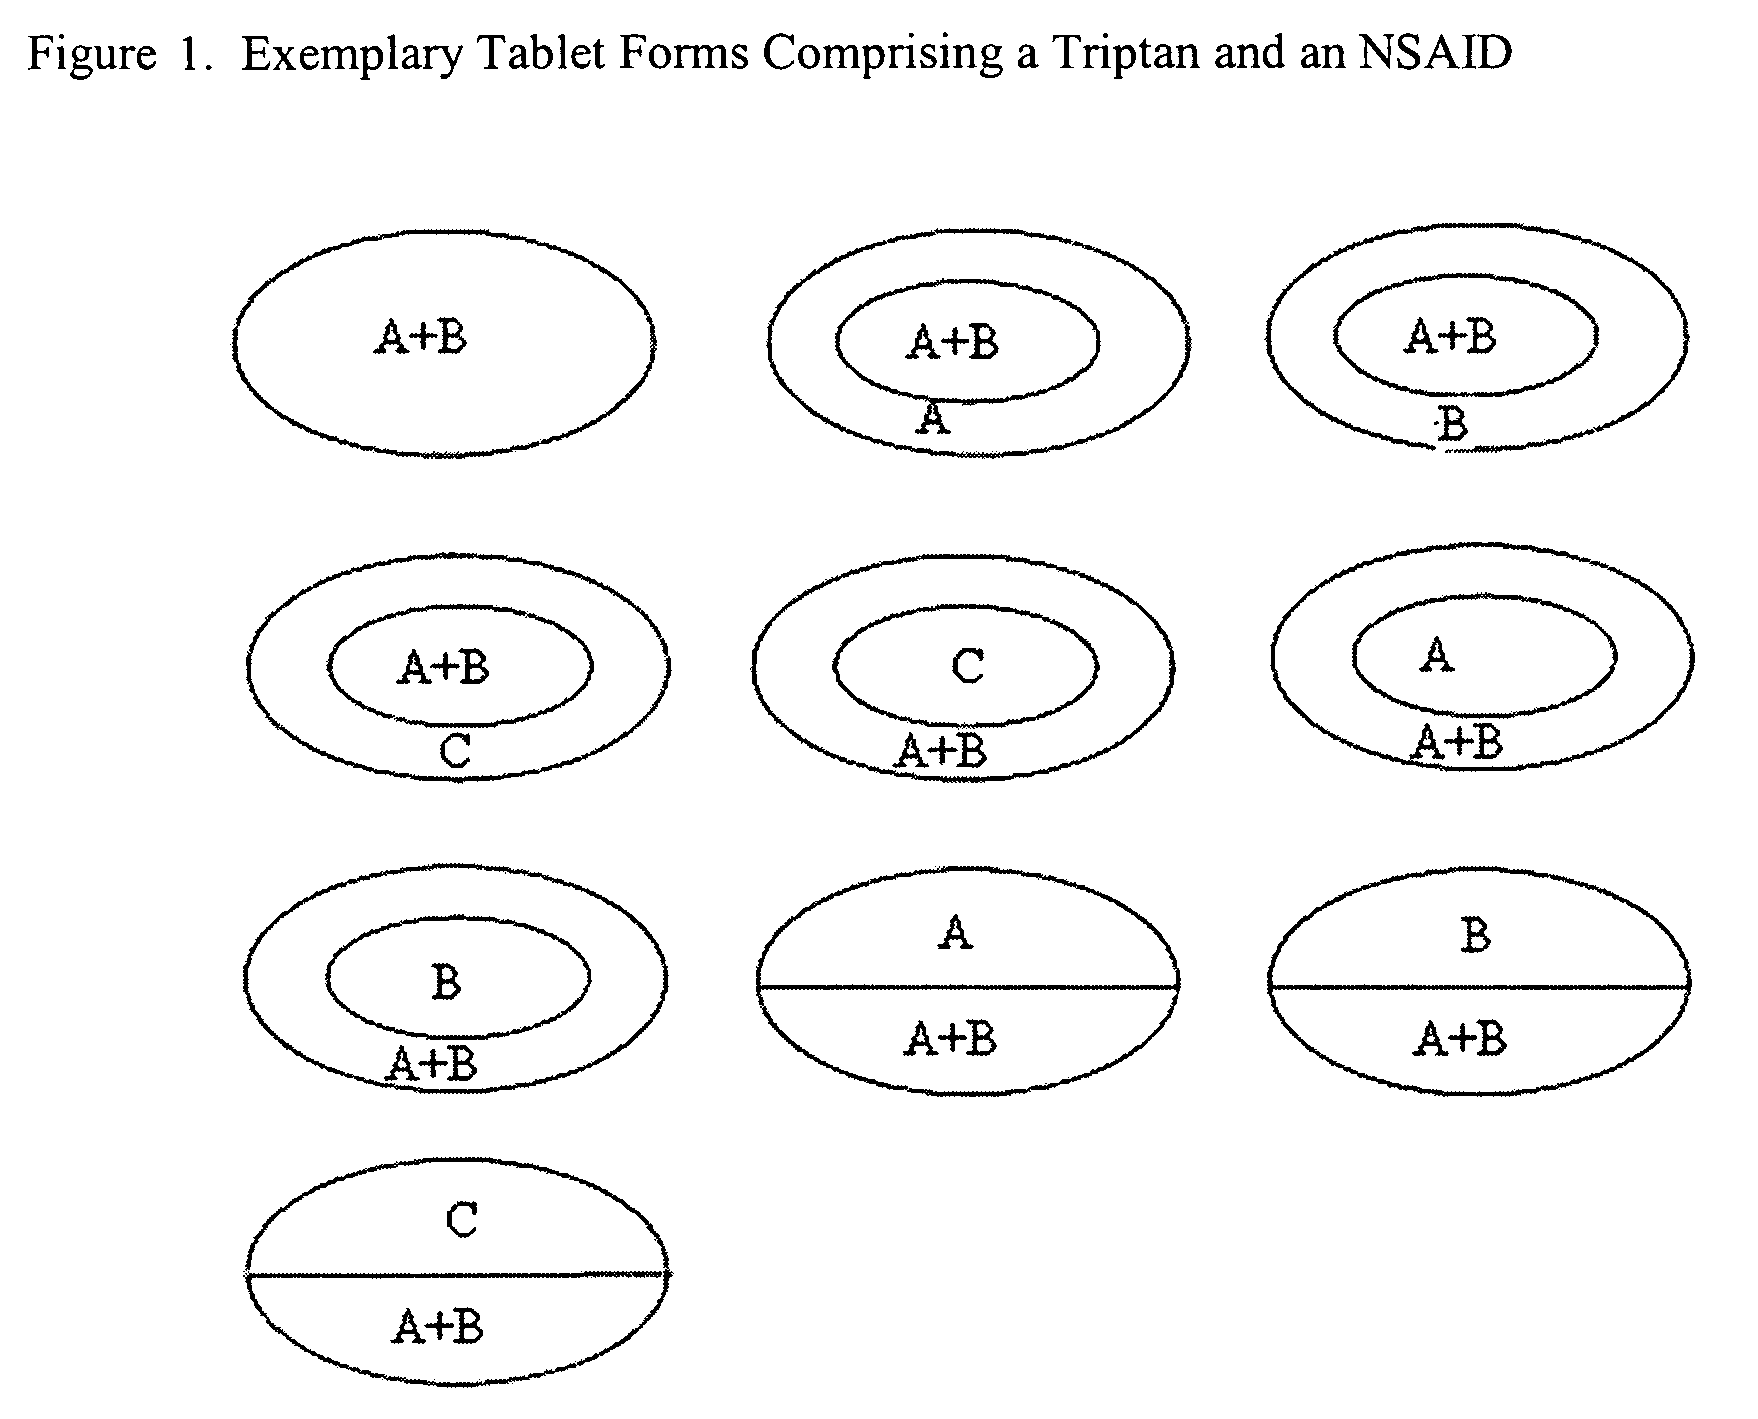 Rapid dissolution of combination products